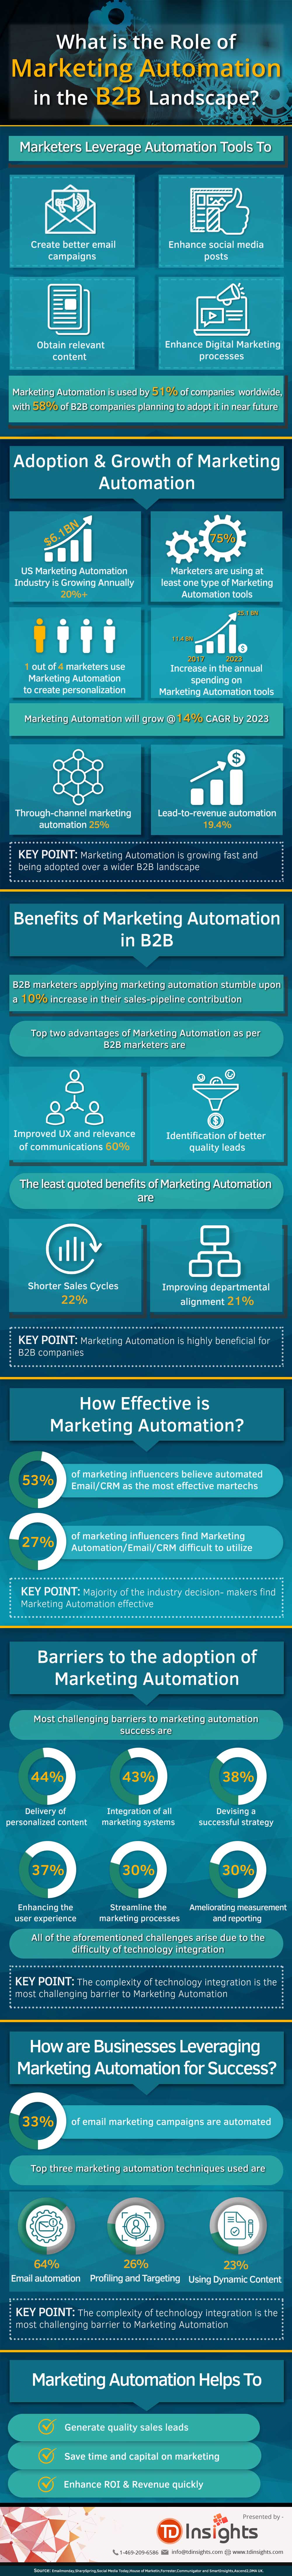 Role of Marketing Automation in B2B Landscape